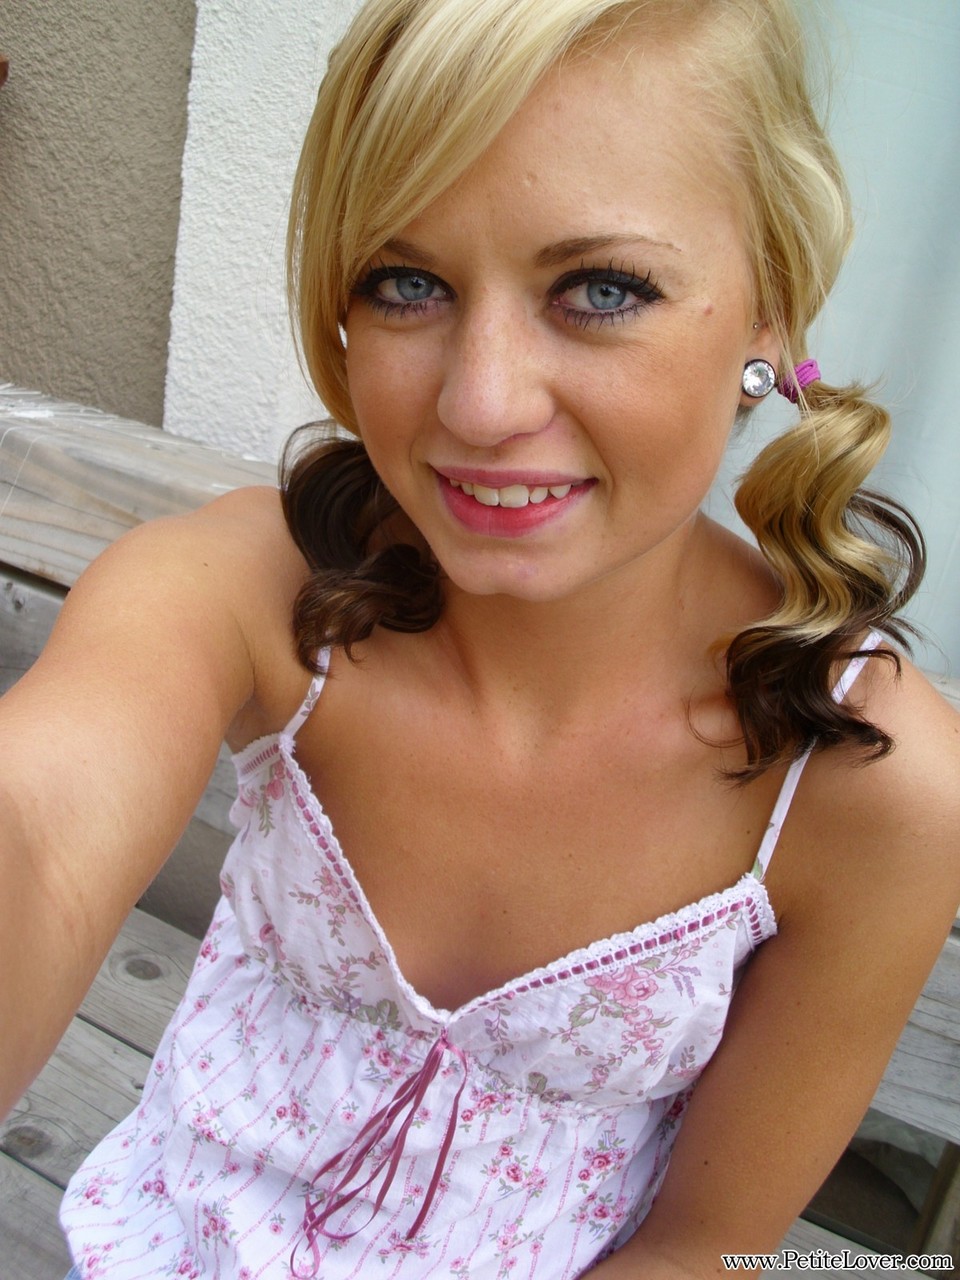 Cute blonde Tiff in pigtails showing off her wee small tits & tiny bald pussy zdjęcie porno #428361803 | Petite Lover Pics, Tiff, Amateur, mobilne porno